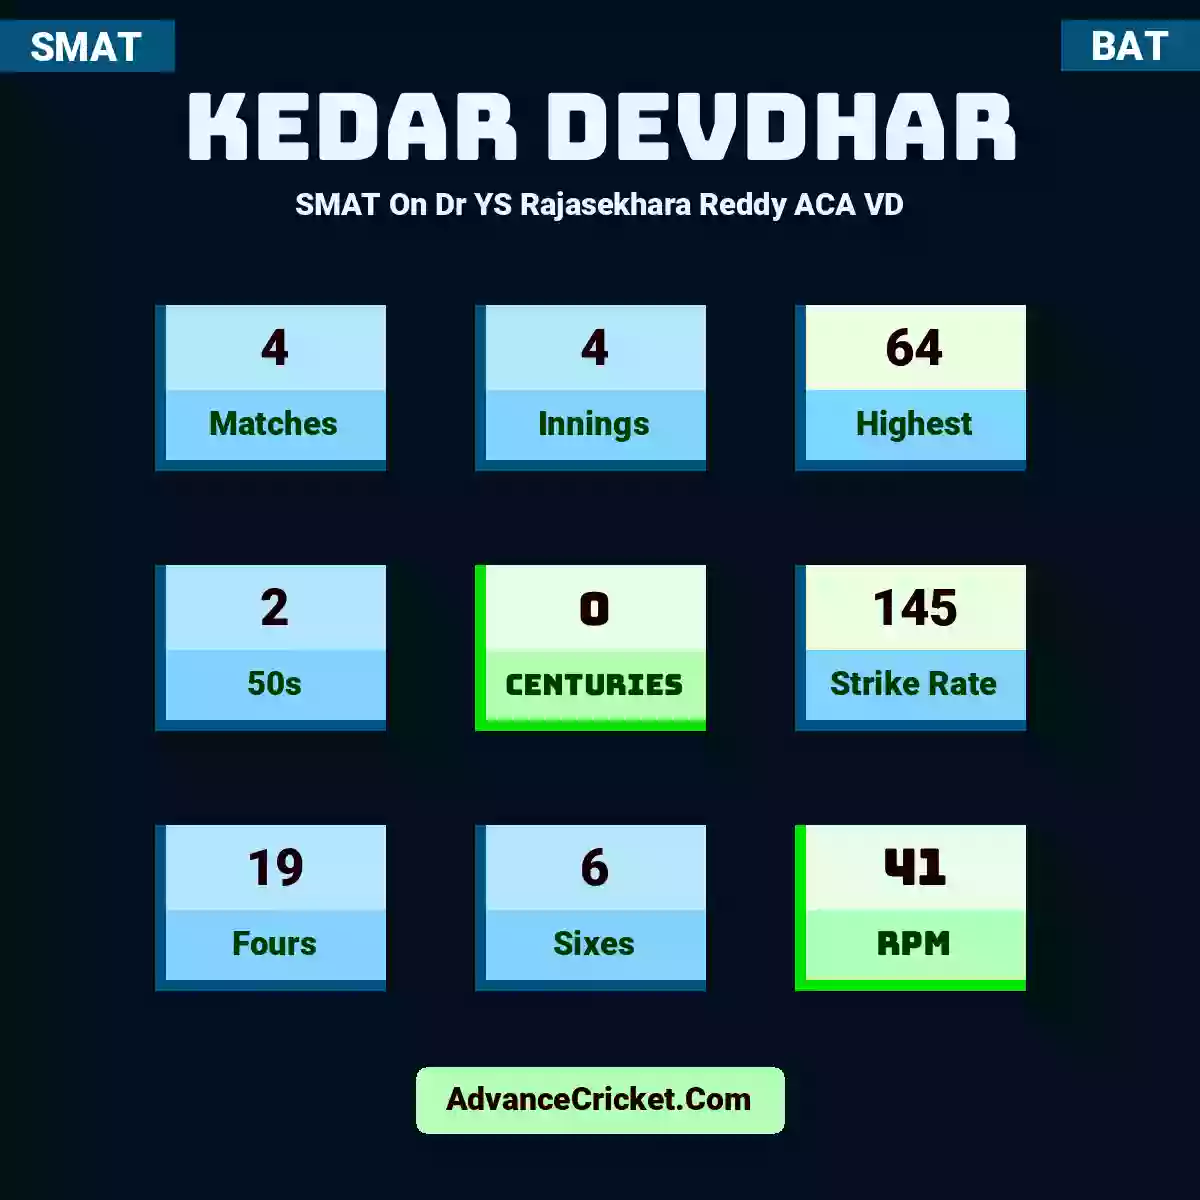 Kedar Devdhar SMAT  On Dr YS Rajasekhara Reddy ACA VD, Kedar Devdhar played 4 matches, scored 64 runs as highest, 2 half-centuries, and 0 centuries, with a strike rate of 145. K.Devdhar hit 19 fours and 6 sixes, with an RPM of 41.